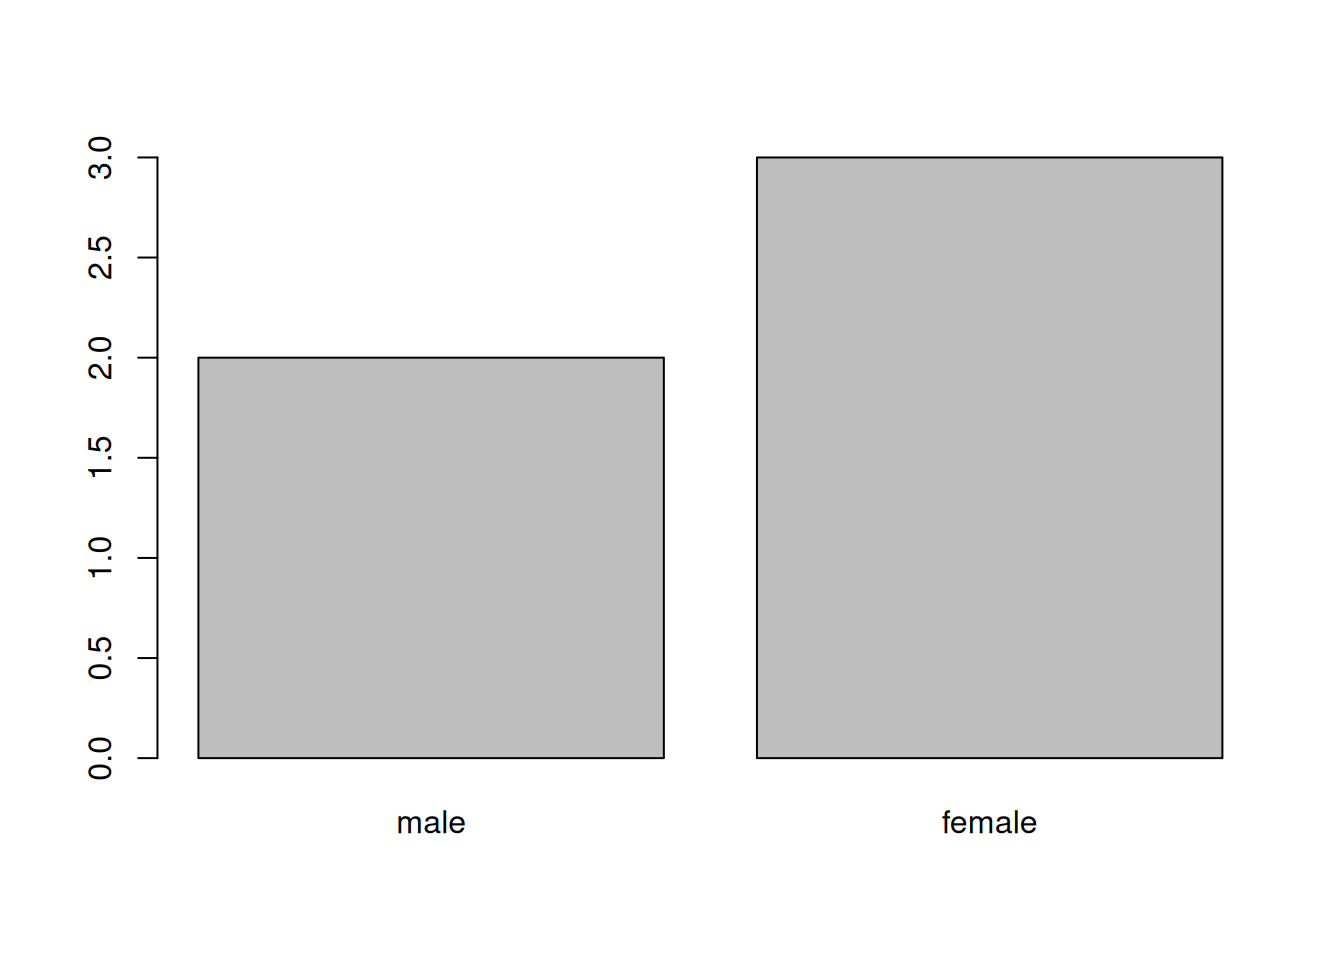 Bar plot of the number of females and males.